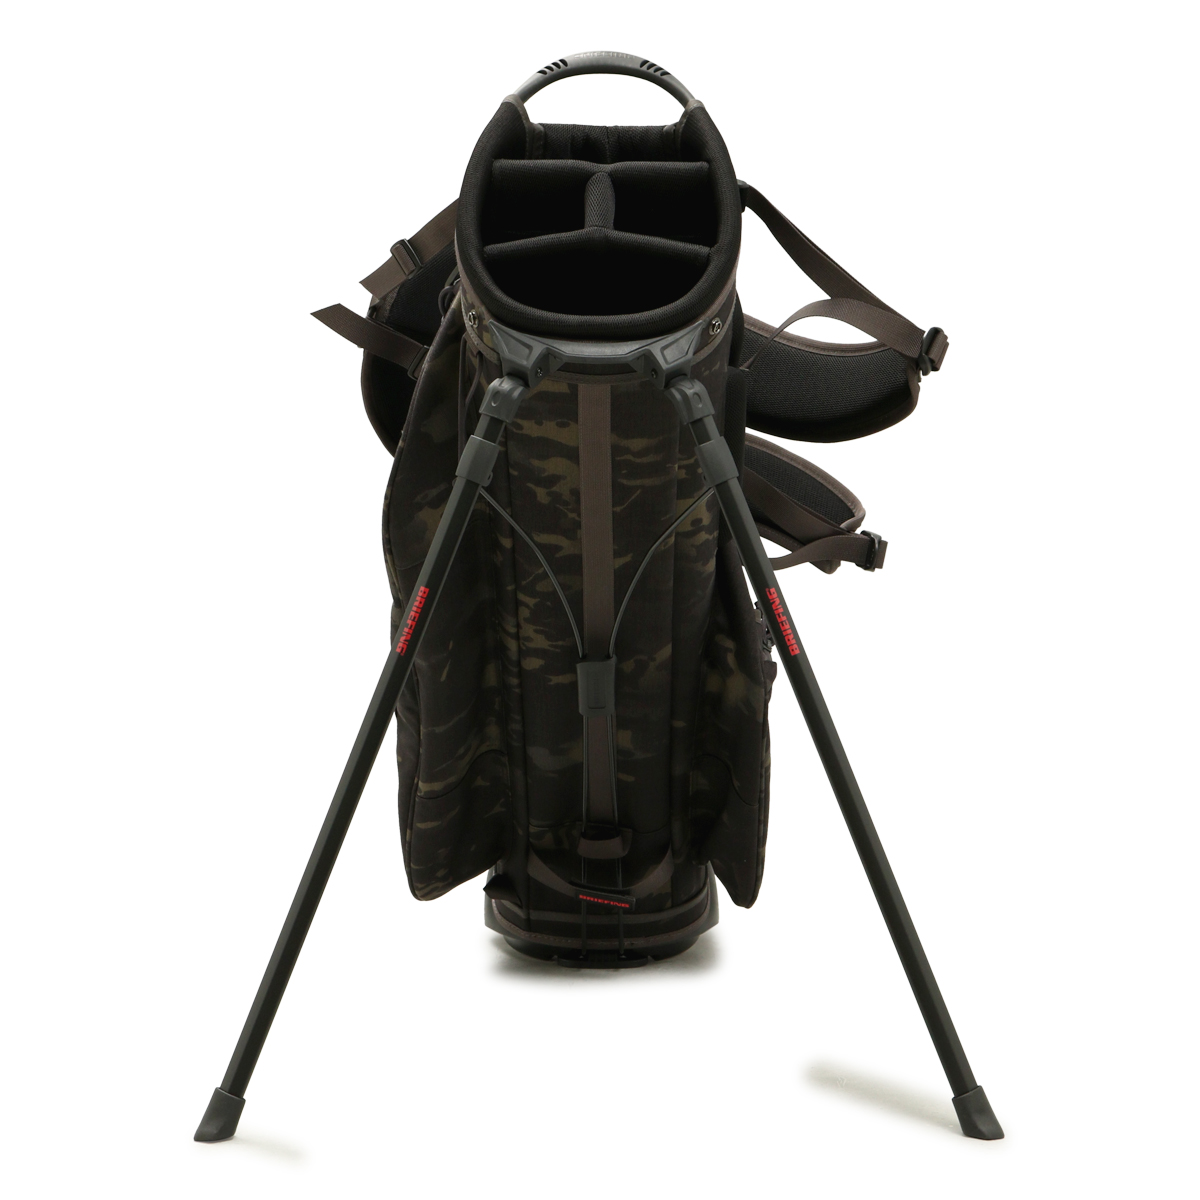  regular goods Briefing Golf caddy bag stand type 9.5 type 4 division 3.75kg CR-4 #03 1000D BRG231D08 BRIEFING water-repellent 